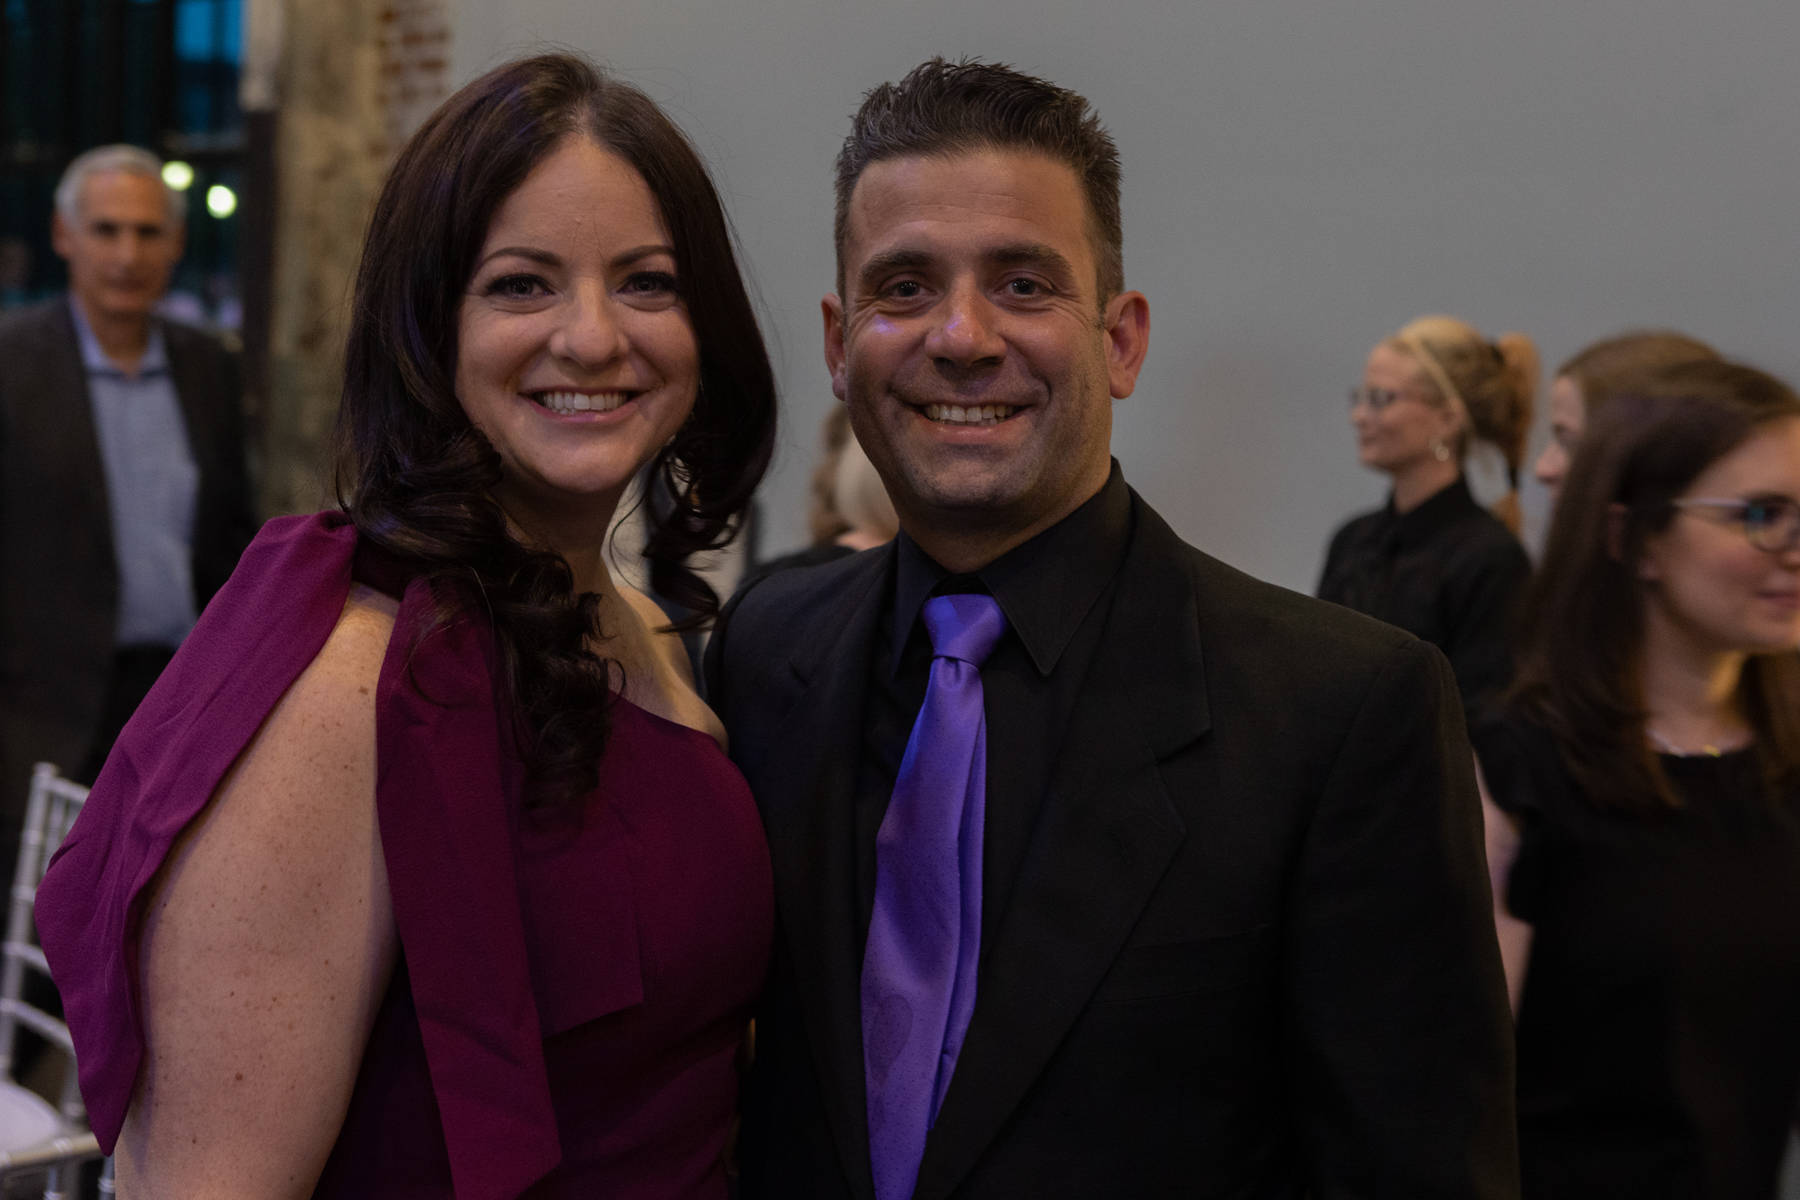 Woman in purple dress posing next to a man wearing a black suit and purple tie